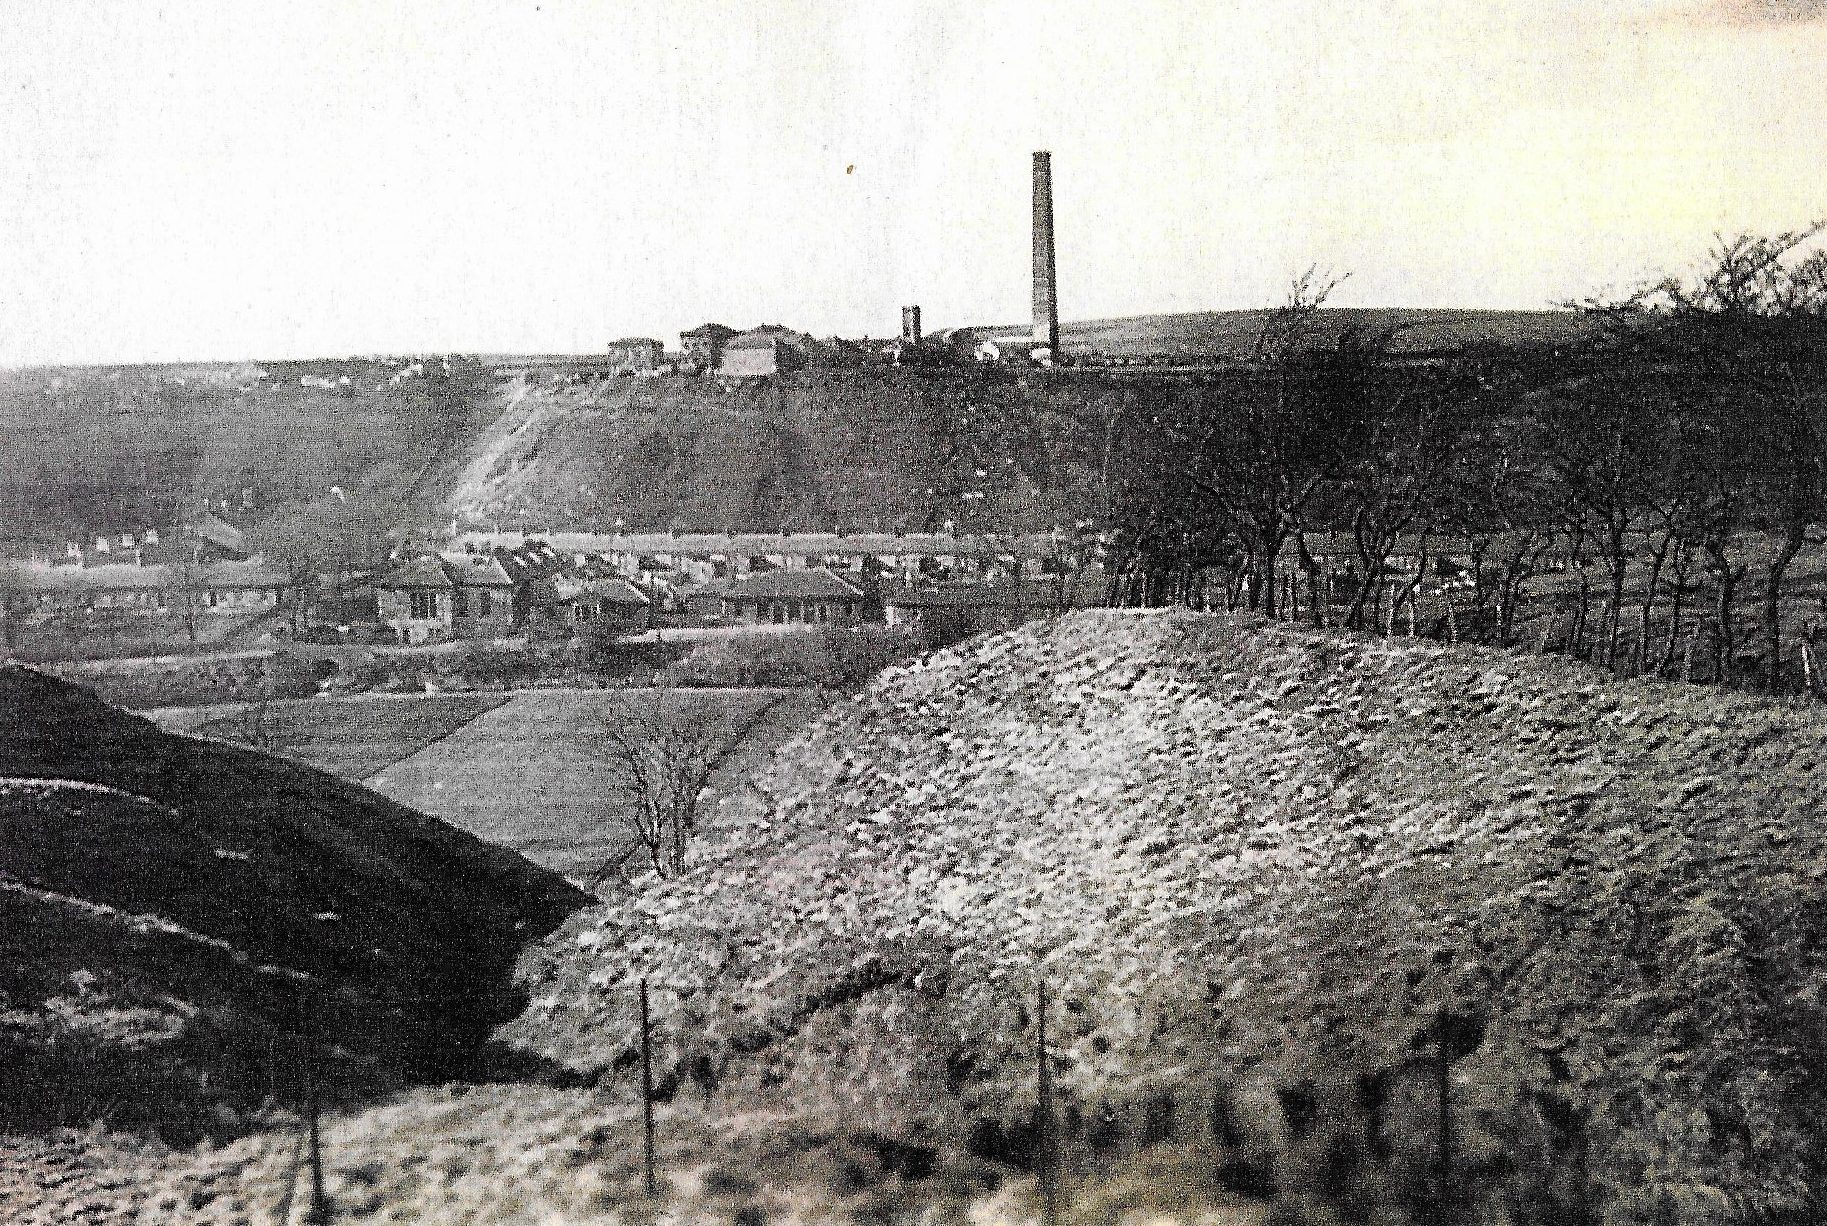 Black and white photograph of a mining village with the bing in the foreground, rows of houses in the middle and chimney stack in the background